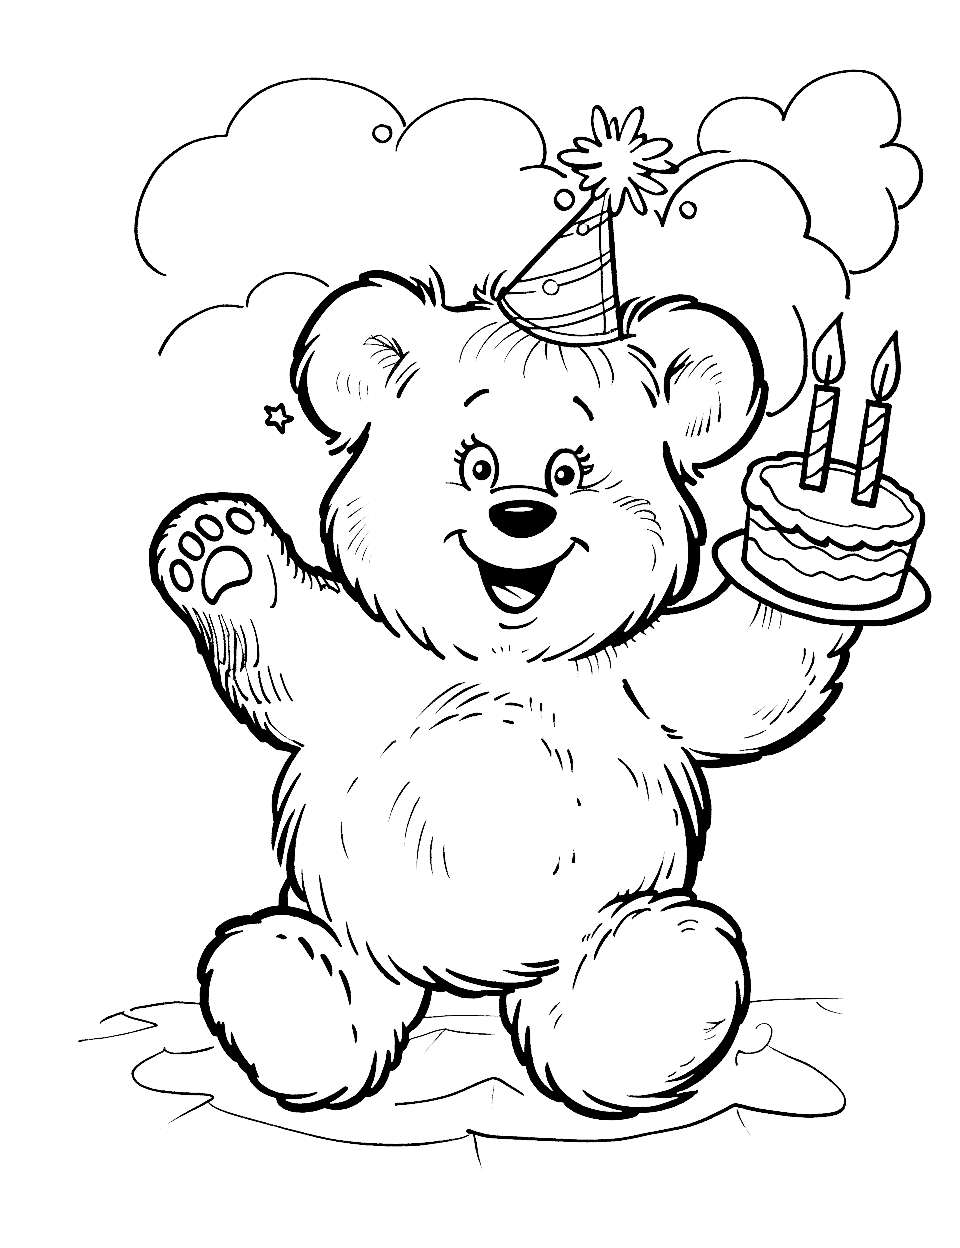 Birthday Party Teddy Bear Coloring Page - A teddy bear celebrating with a birthday cake and hats.